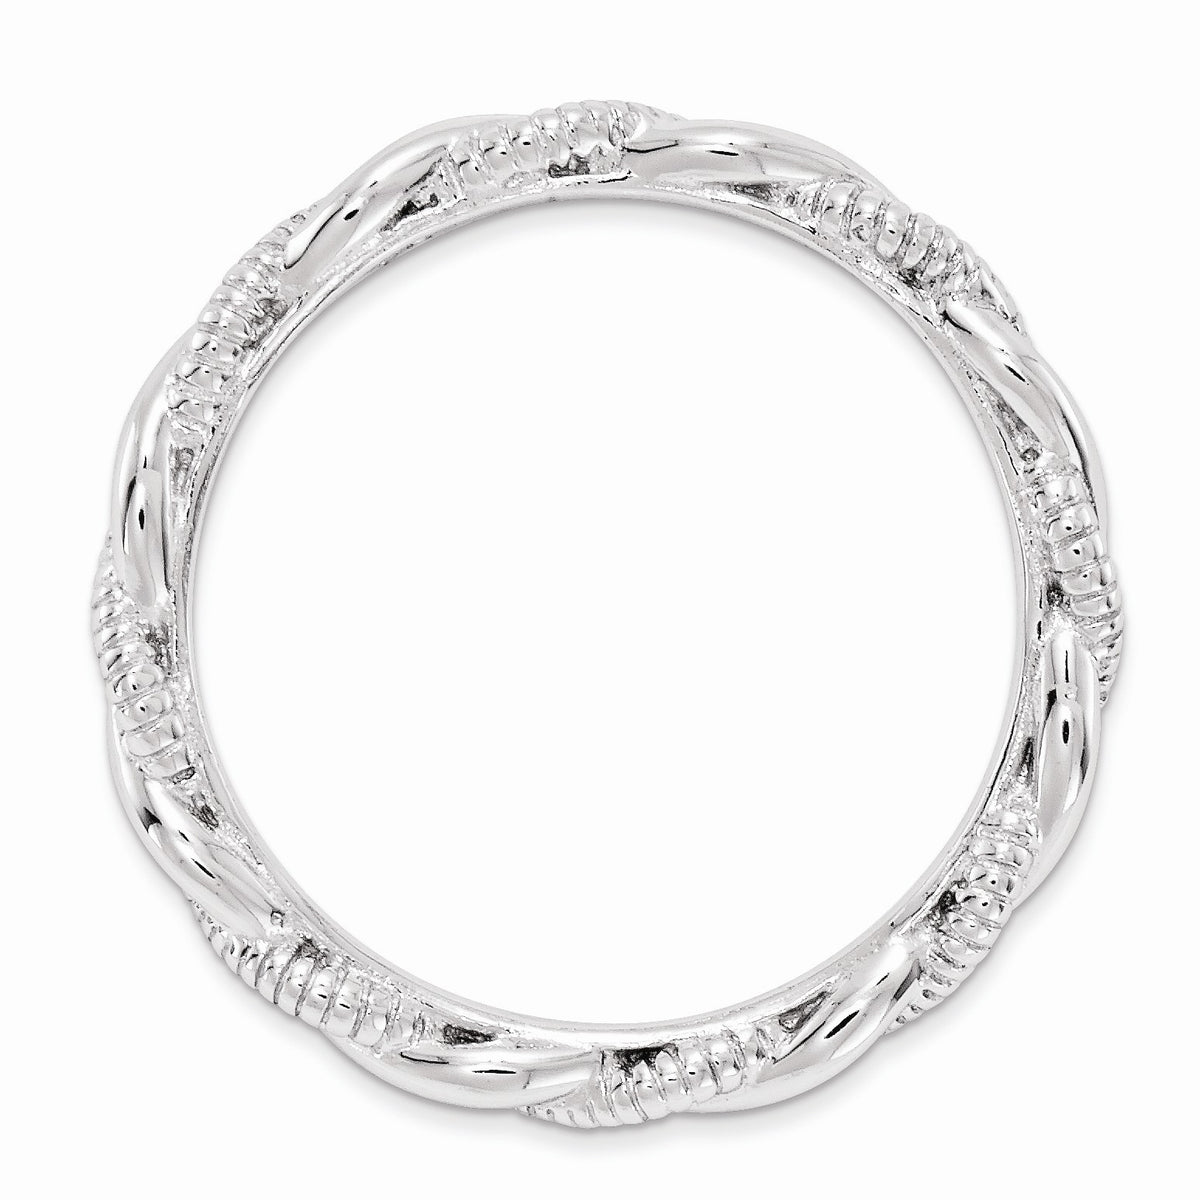 Alternate view of the 2.5mm Rhodium Plated Sterling Silver Stackable Twisted Band by The Black Bow Jewelry Co.